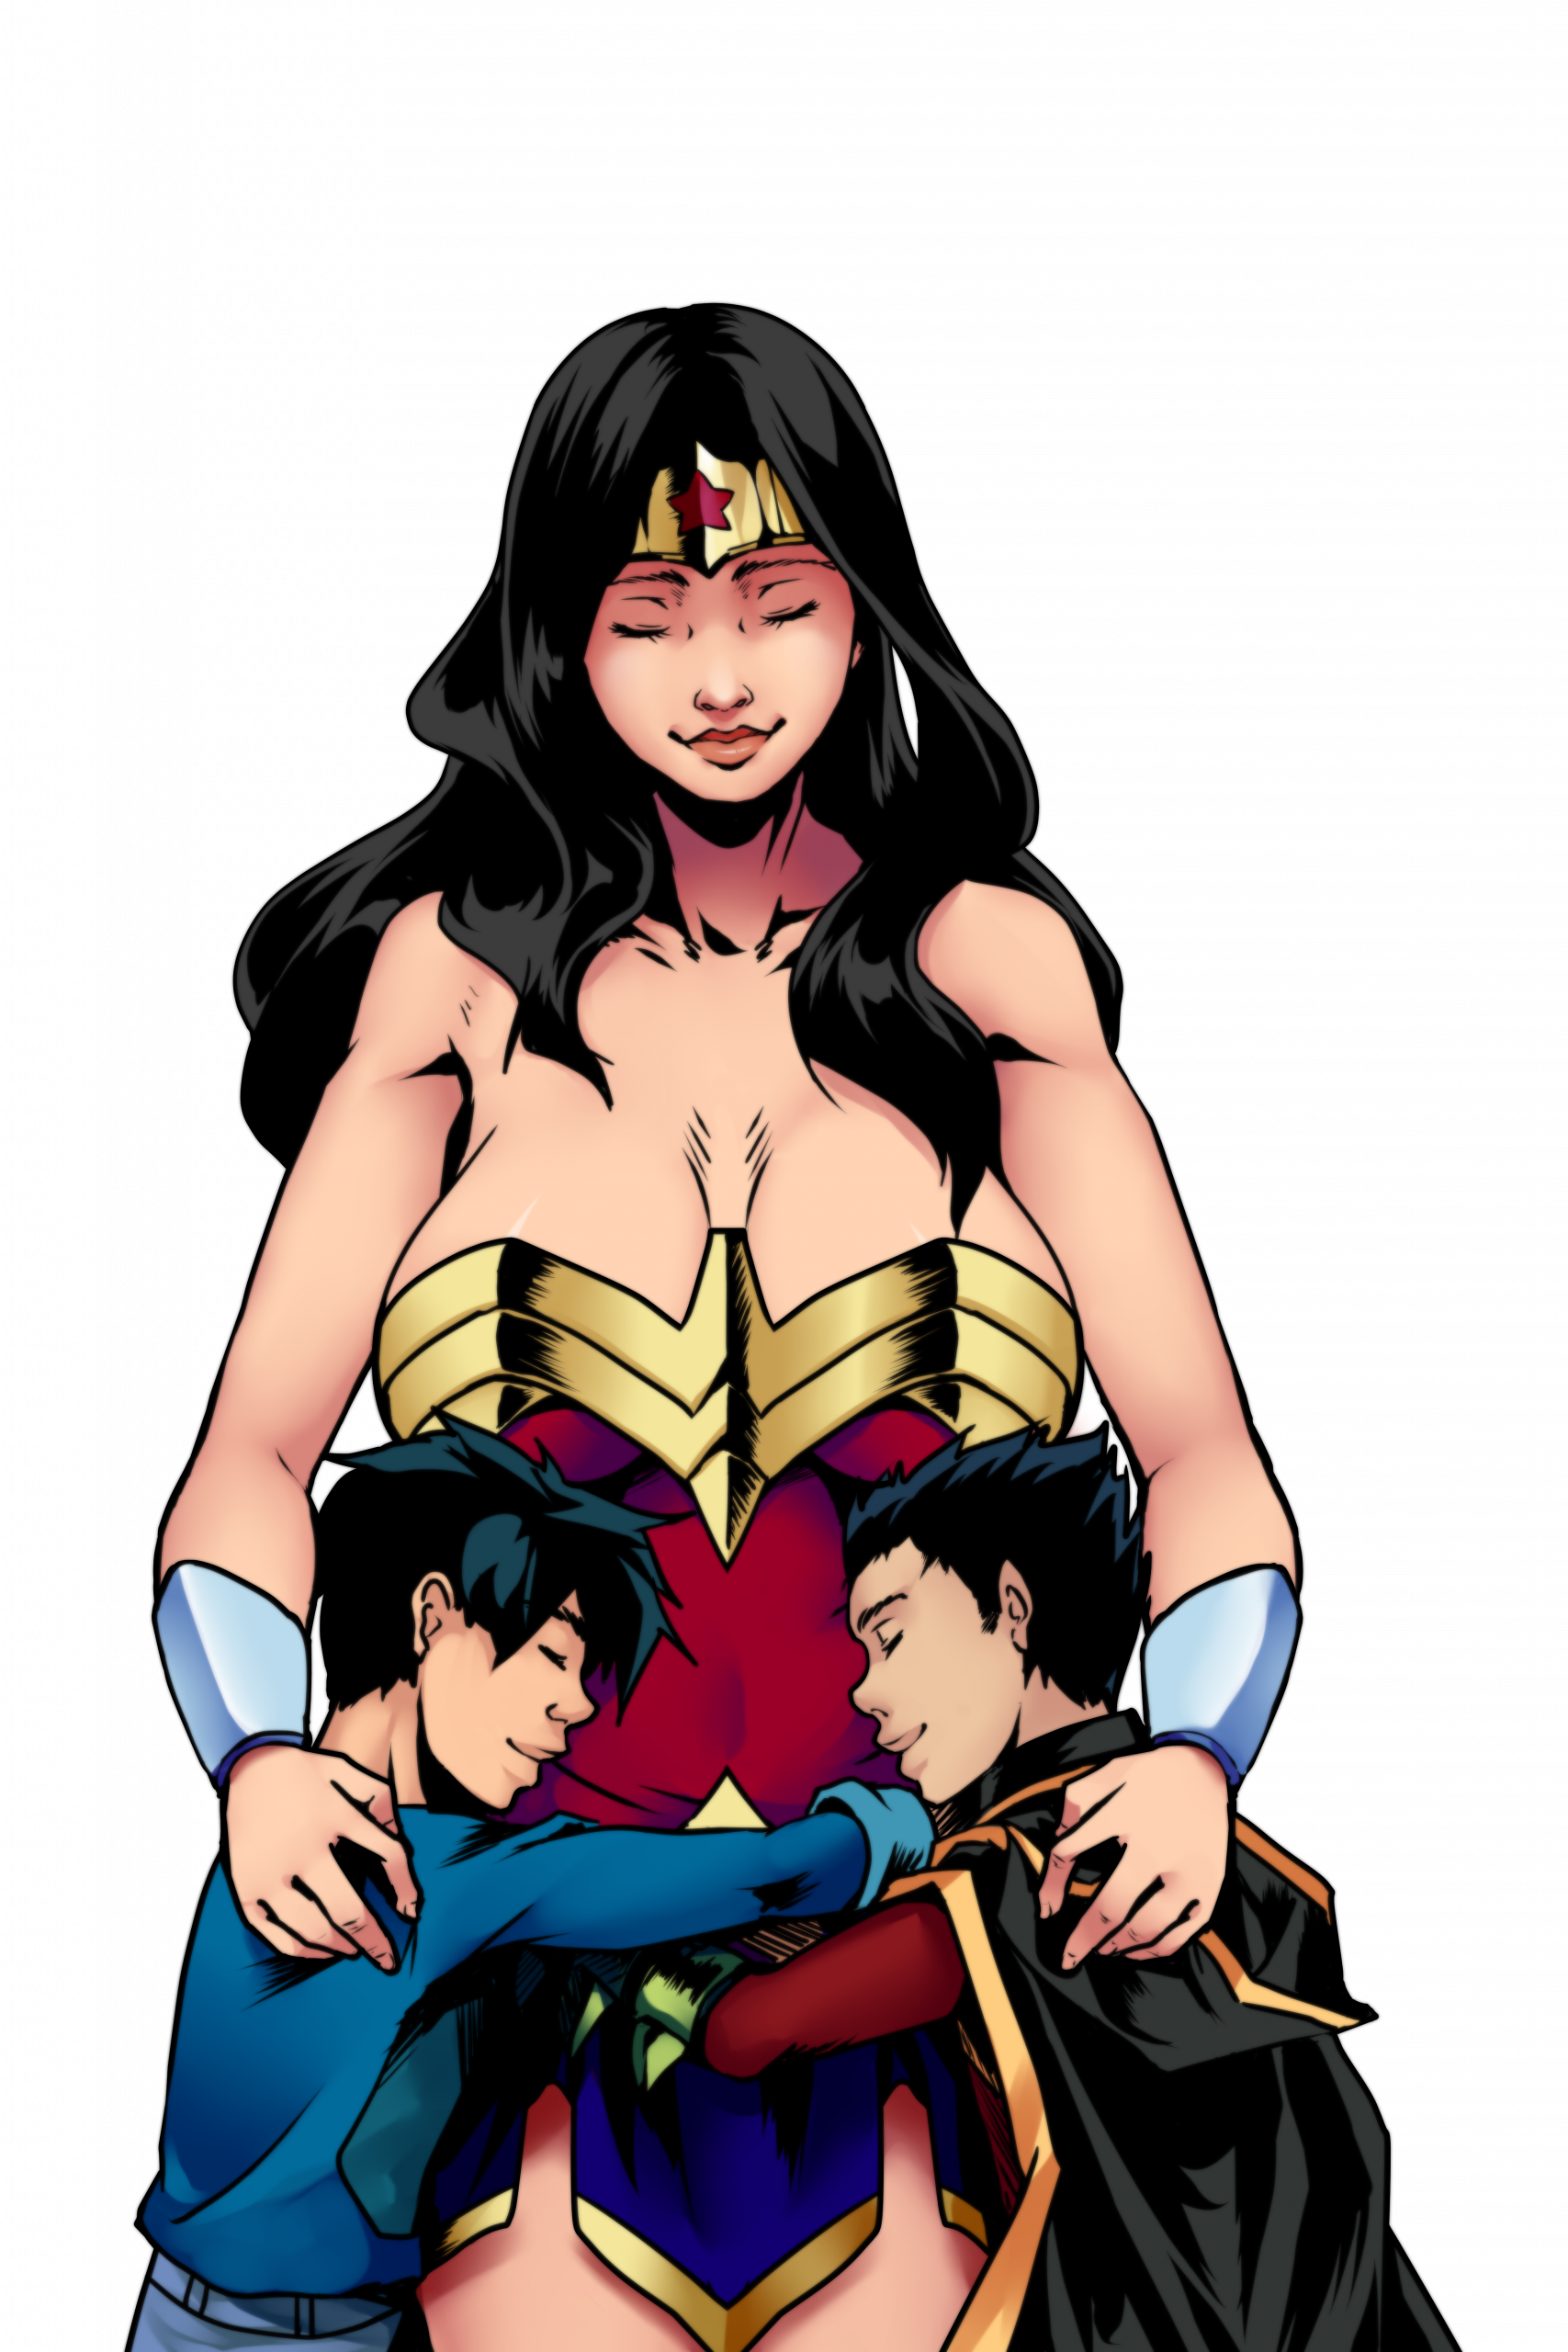 Super Sons 2 porn comics Oral sex, Anal Sex, BDSM, Big Tits, Blowjob, Bondage, Creampie, Deepthroat, Domination, Double Penetration, Group Sex, Straight, Straight Shota, Submission, Threesome, X-Ray